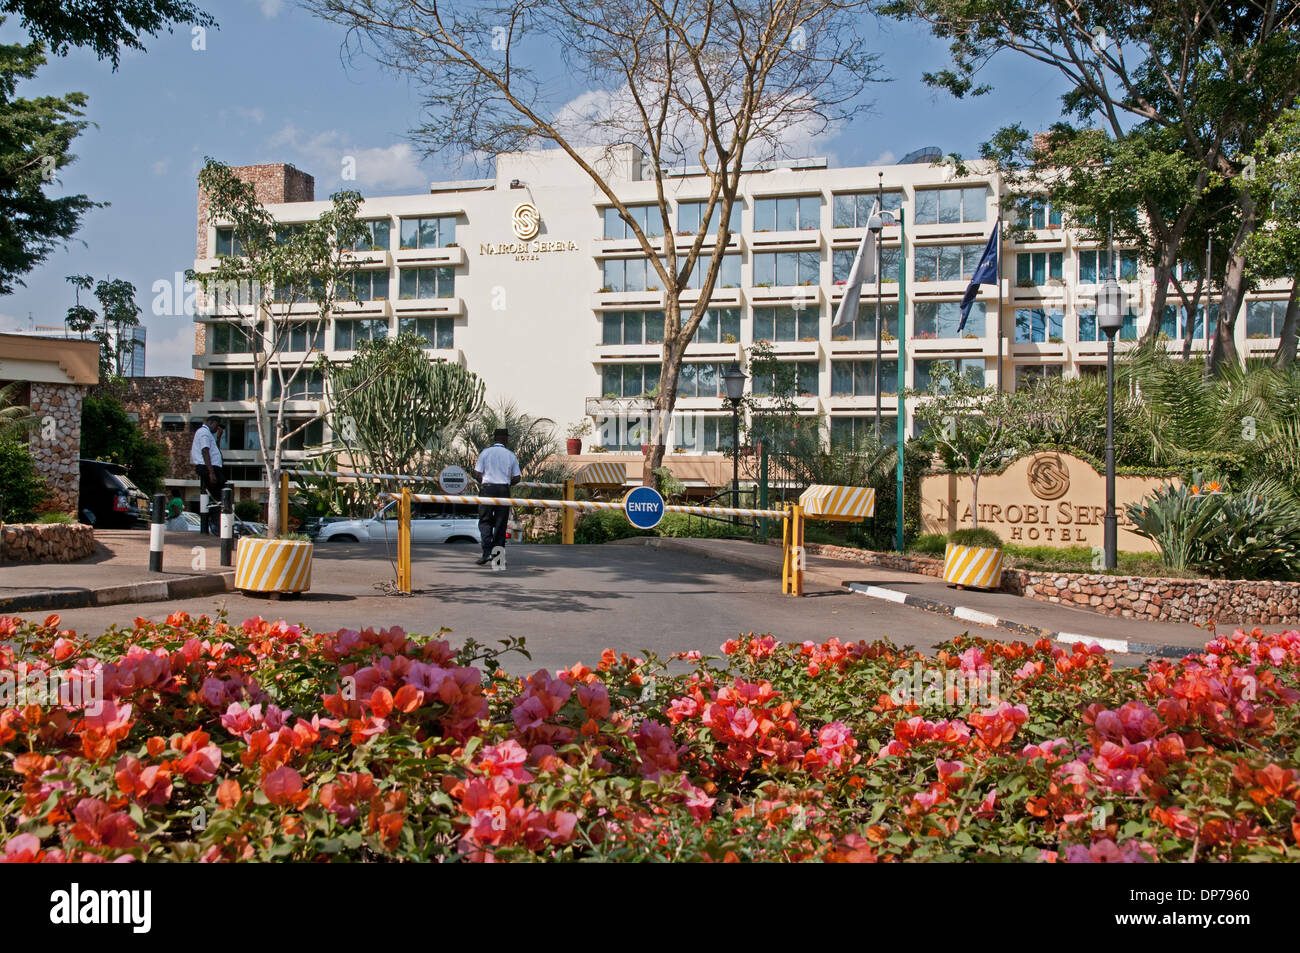 Exterior of Nairobi Serena Hotel Nairobi Kenya Africa showing double barriers at entrance to car park with bougainvillea flowers Stock Photo